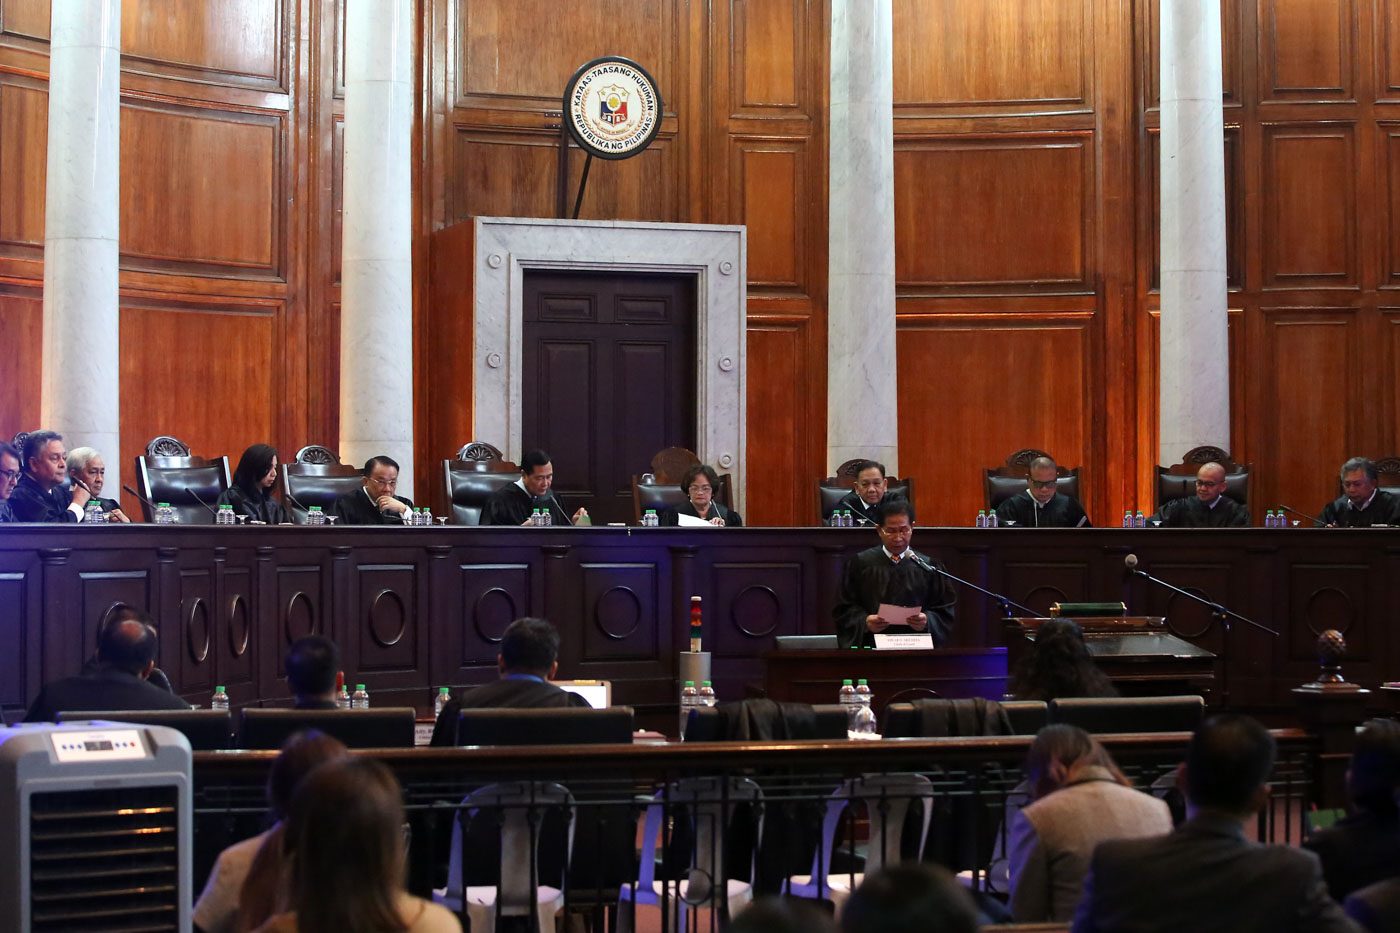 ICC pullout: Are there limits to Duterte’s presidential discretion?